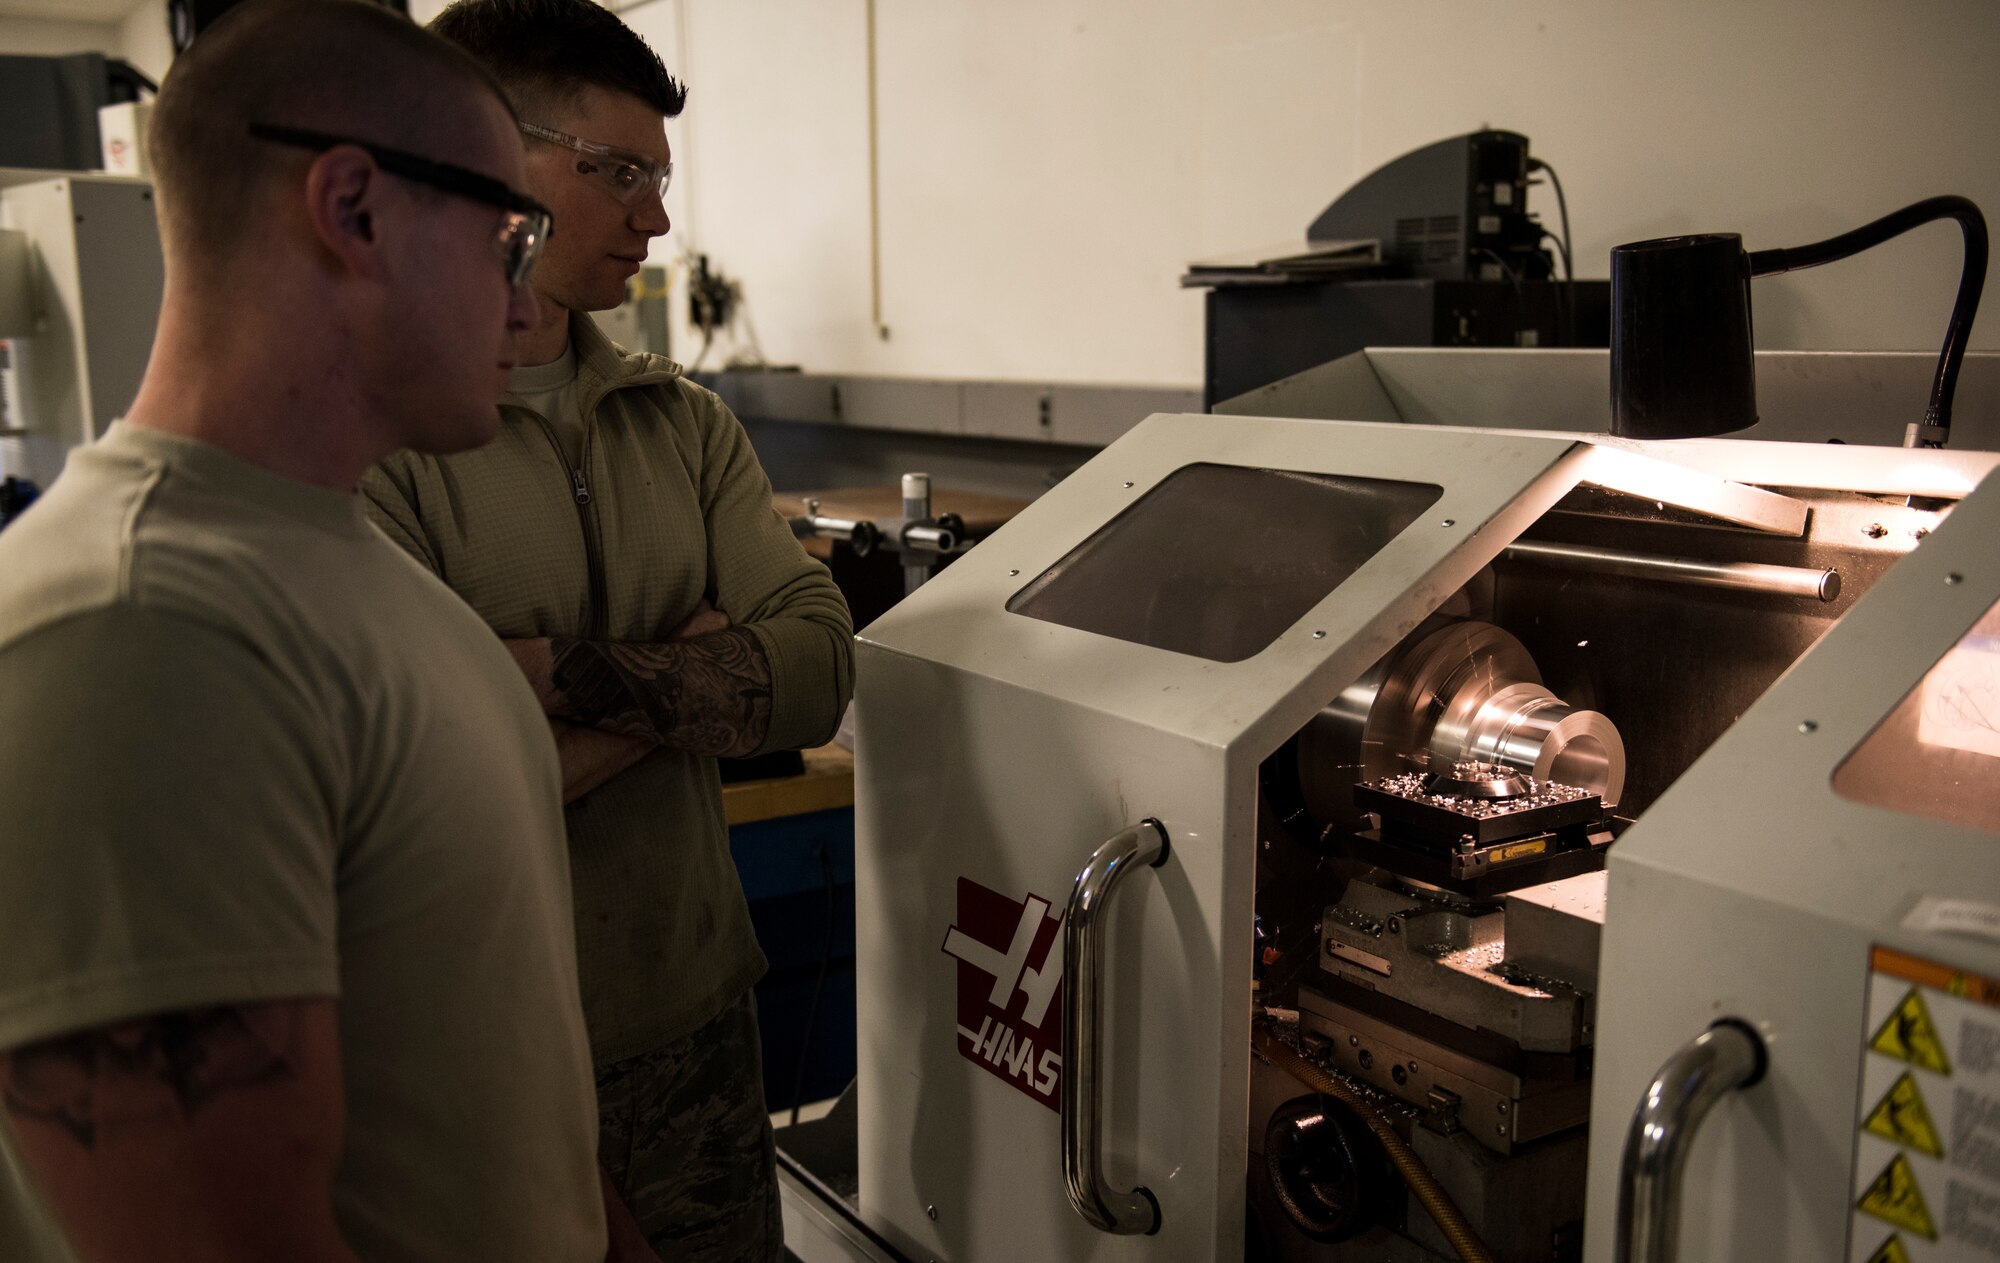 Staff Sgt. Steven Doucette, 92nd Maintenance Squadron aircraft metals technology shift lead, and Staff Sgt. Steven Bultemeier, 92nd MXS aircraft metals technology craftsman, use the Computer Numerically Controlled lathe April 26, 2018, at Fairchild Air Force Base, Washington. The CNC lathe is imperative to reverse engineering and manufacturing the main inlet fuel coupling needed to refuel coalition aircraft. (U.S. Air Force photo/Senior Airman Sean Campbell)